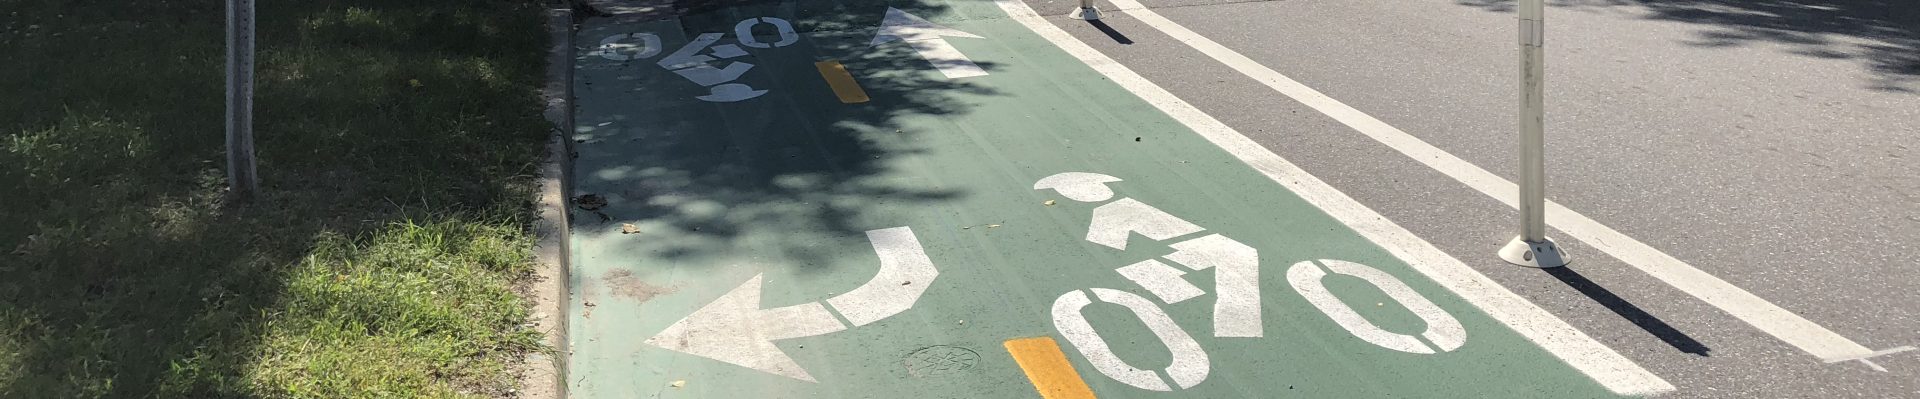 Street Plans Selected to Lead Jersey City Bicycle Master Plan